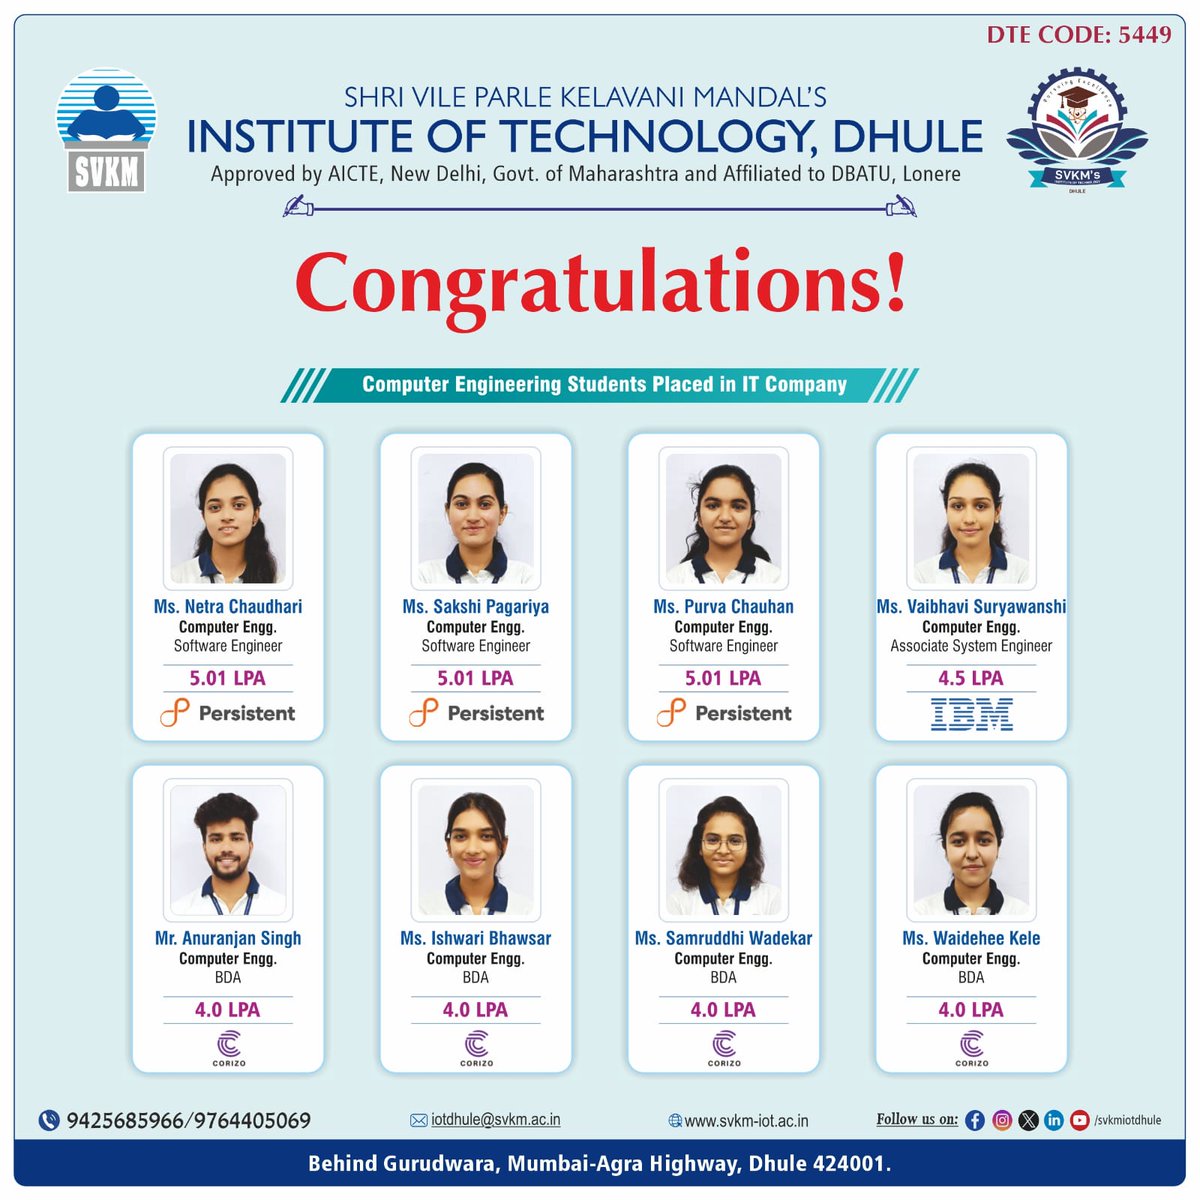 Congratulations to our tech-savvy grads, poised to innovate and transform the world of technology! 🌐

#svkmiotdhule #svkmdhulecampus #TechTrailblazers #ITPlacements #FutureInnovation #innovation #transformation #digital #future